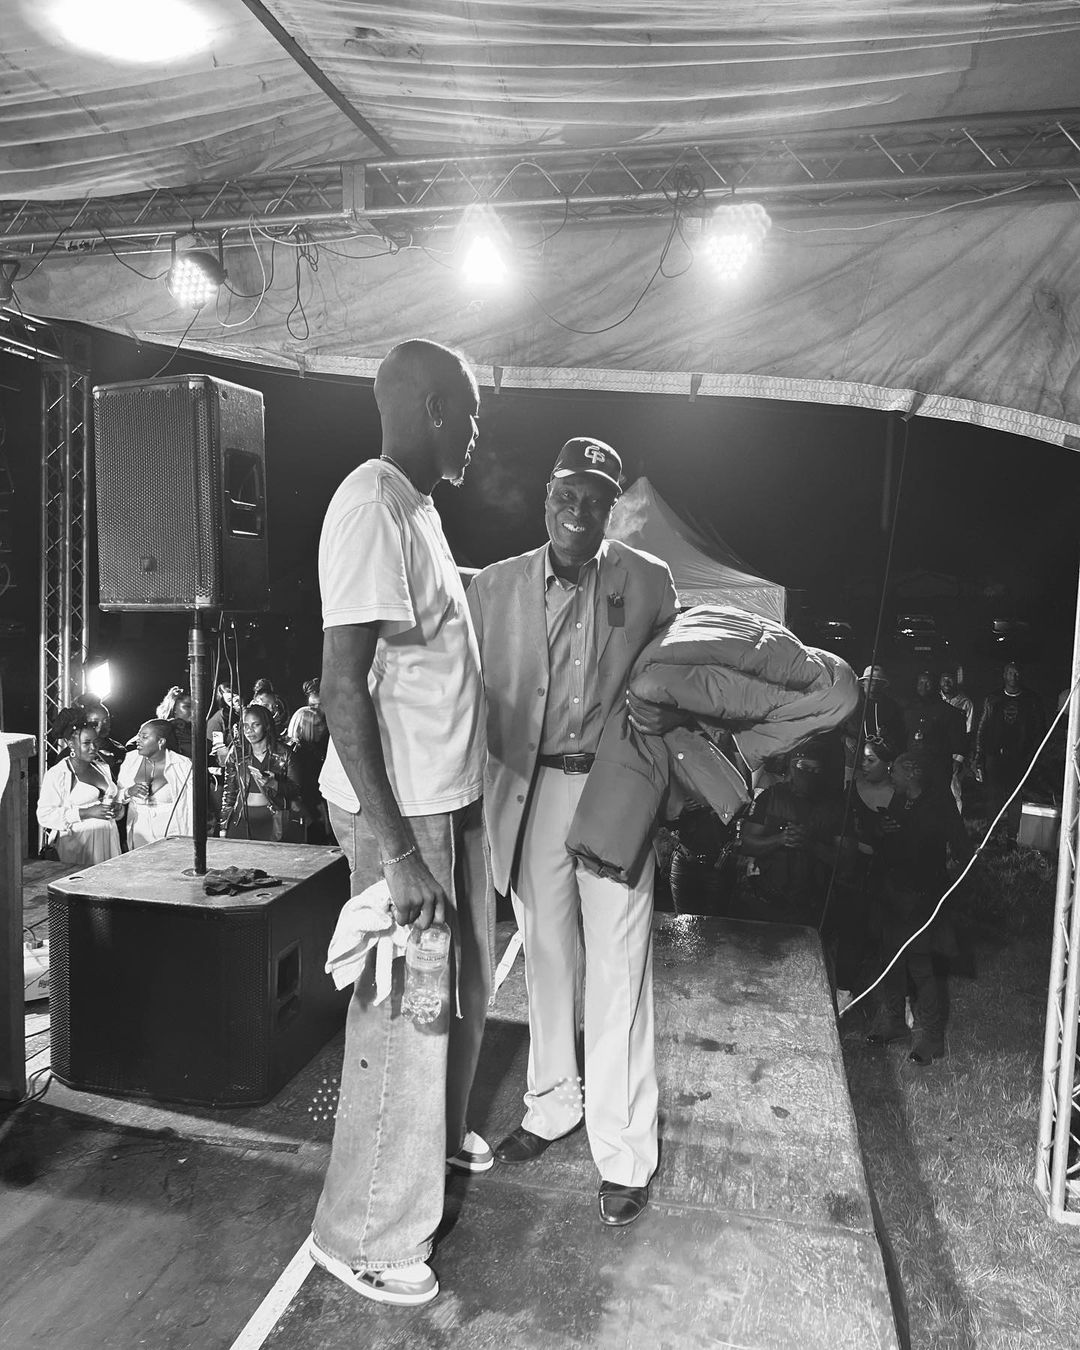 Oscar Mbo gets emotional as his father attends his show